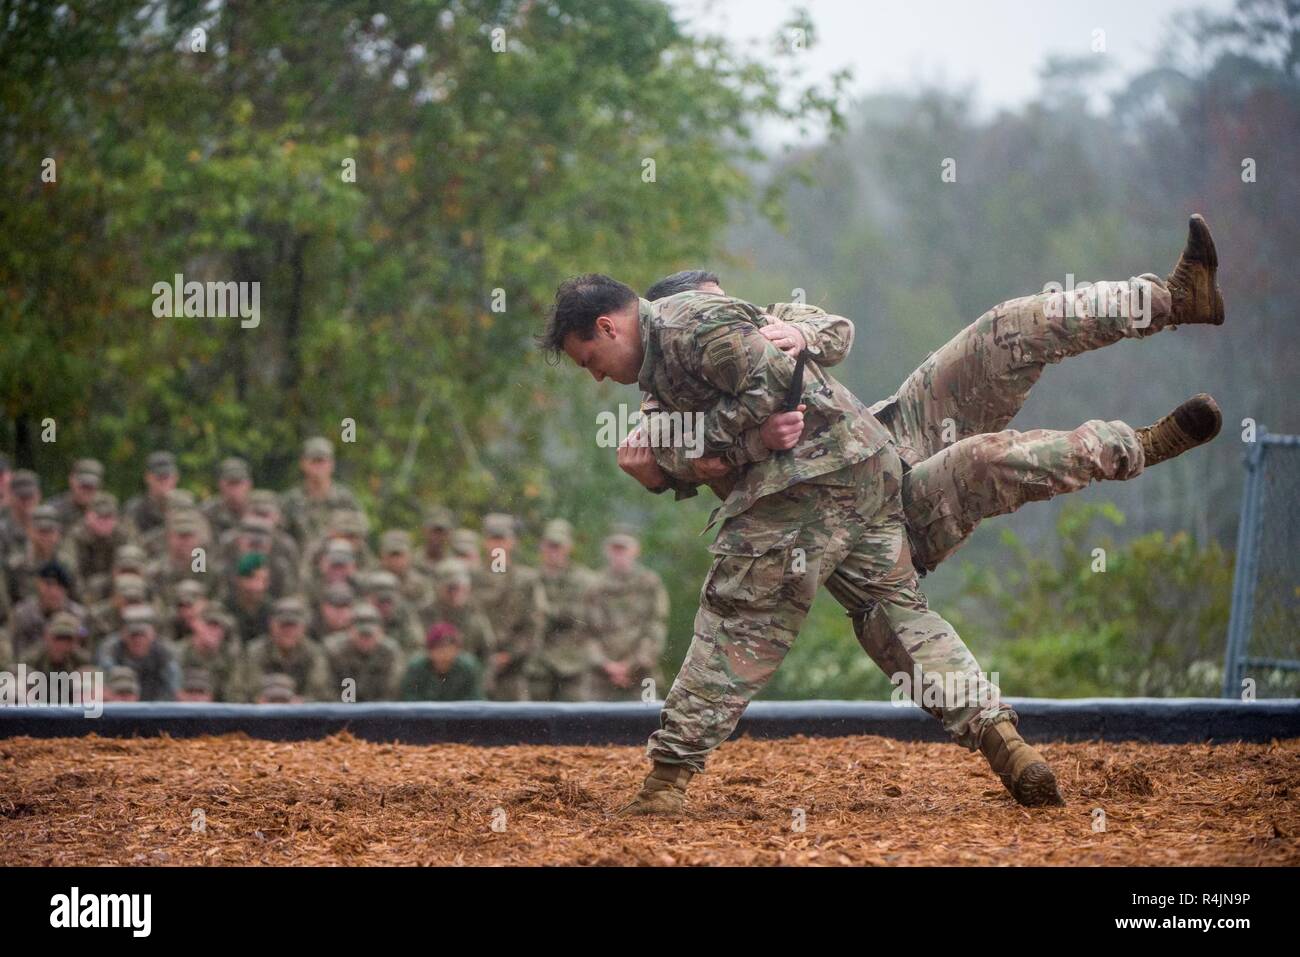 FORT BENNING, Ga. (Oct. 26, 2018) -- Two Soldiers with the Airborne and Ranger Training Brigade demonstrate hand-to-hand combat maneuvers during the Rangers In Action demonstration preceding a Ranger Course graduation. Under Secretary of the Army Ryan D. McCarthy speaks at the Airborne and Ranger Training Brigade ranger graduation at Victory Pond at Fort Benning, Georgia, Oct. 26. McCarthy, who served five years in the Army, was involved in combat operations in Afghanistan in support of Operation Enduring Freedom with the 75th Ranger Regiment, U.S. Special Operations Command. Stock Photo